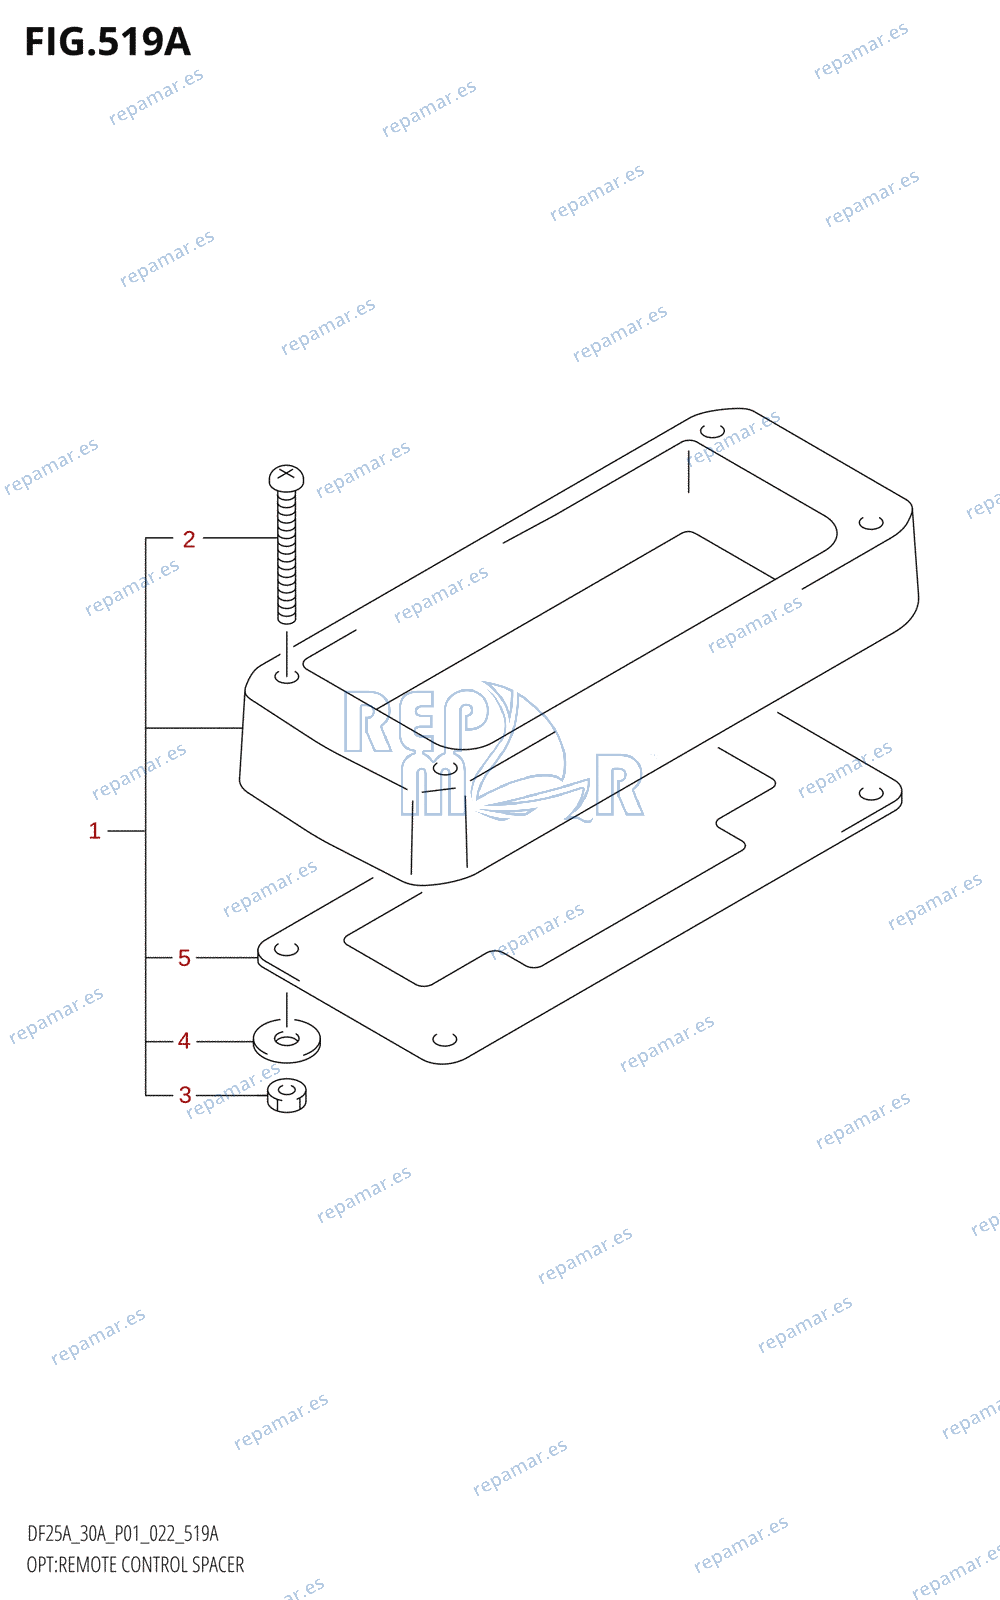 519A - OPT:REMOTE CONTROL SPACER (DF25A,DF25AR,DF25AT:022,DF25ATH,DF30A,DF30AR,DF30AT:022,DF30ATH,DF30AQ)